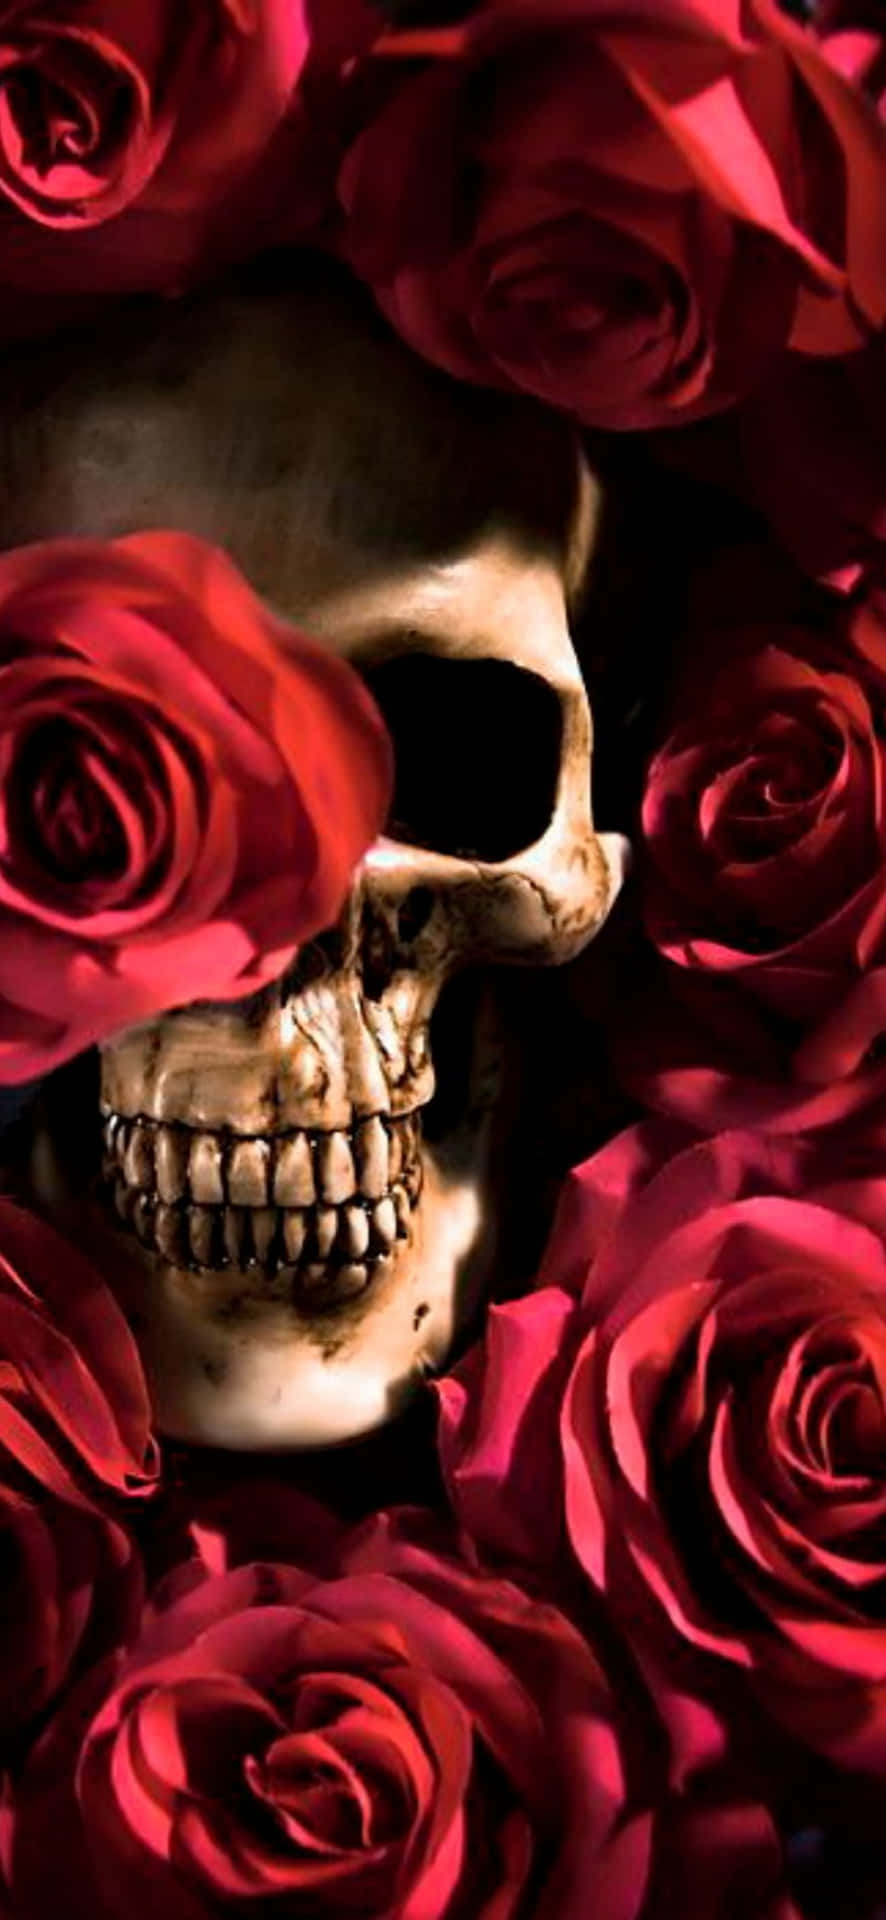 Love Skulls And Roses - An Elegant and Gothic Combination of Beauty and Danger Wallpaper